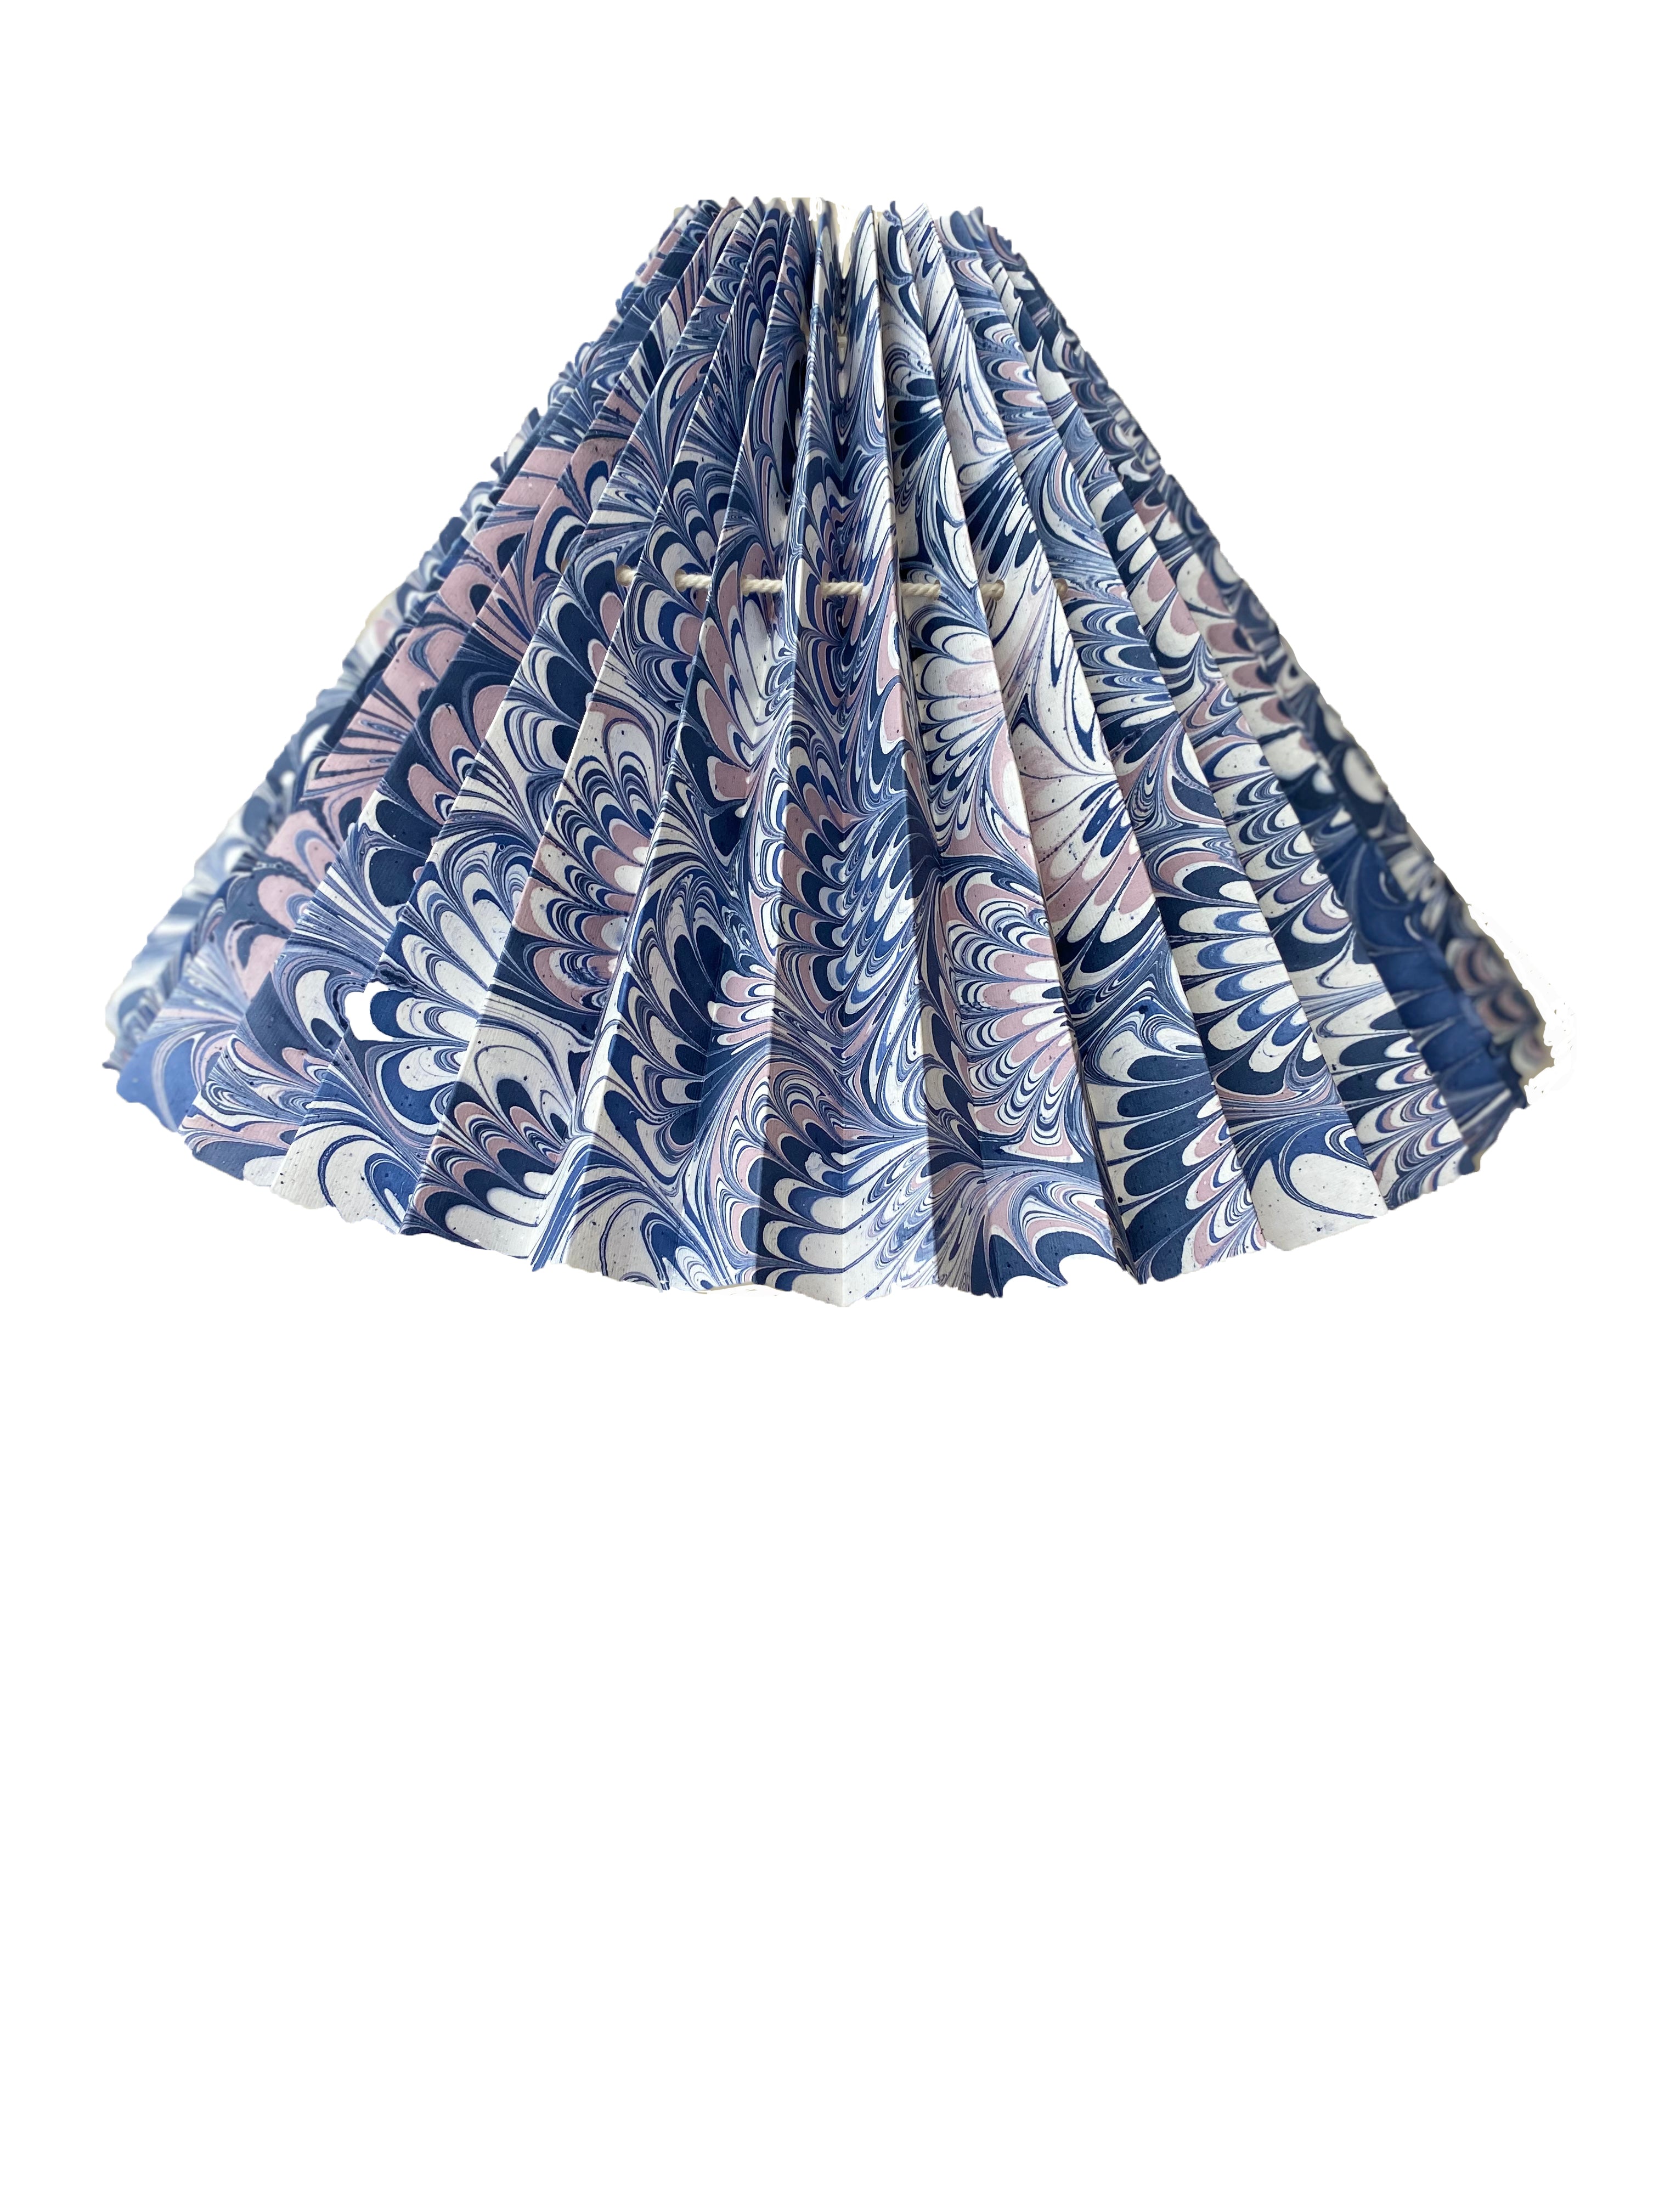 HANDMADE MARBELED PAPER LAMPSHADE IN BLUE, PINK AND WHITE - Sale 30% off.